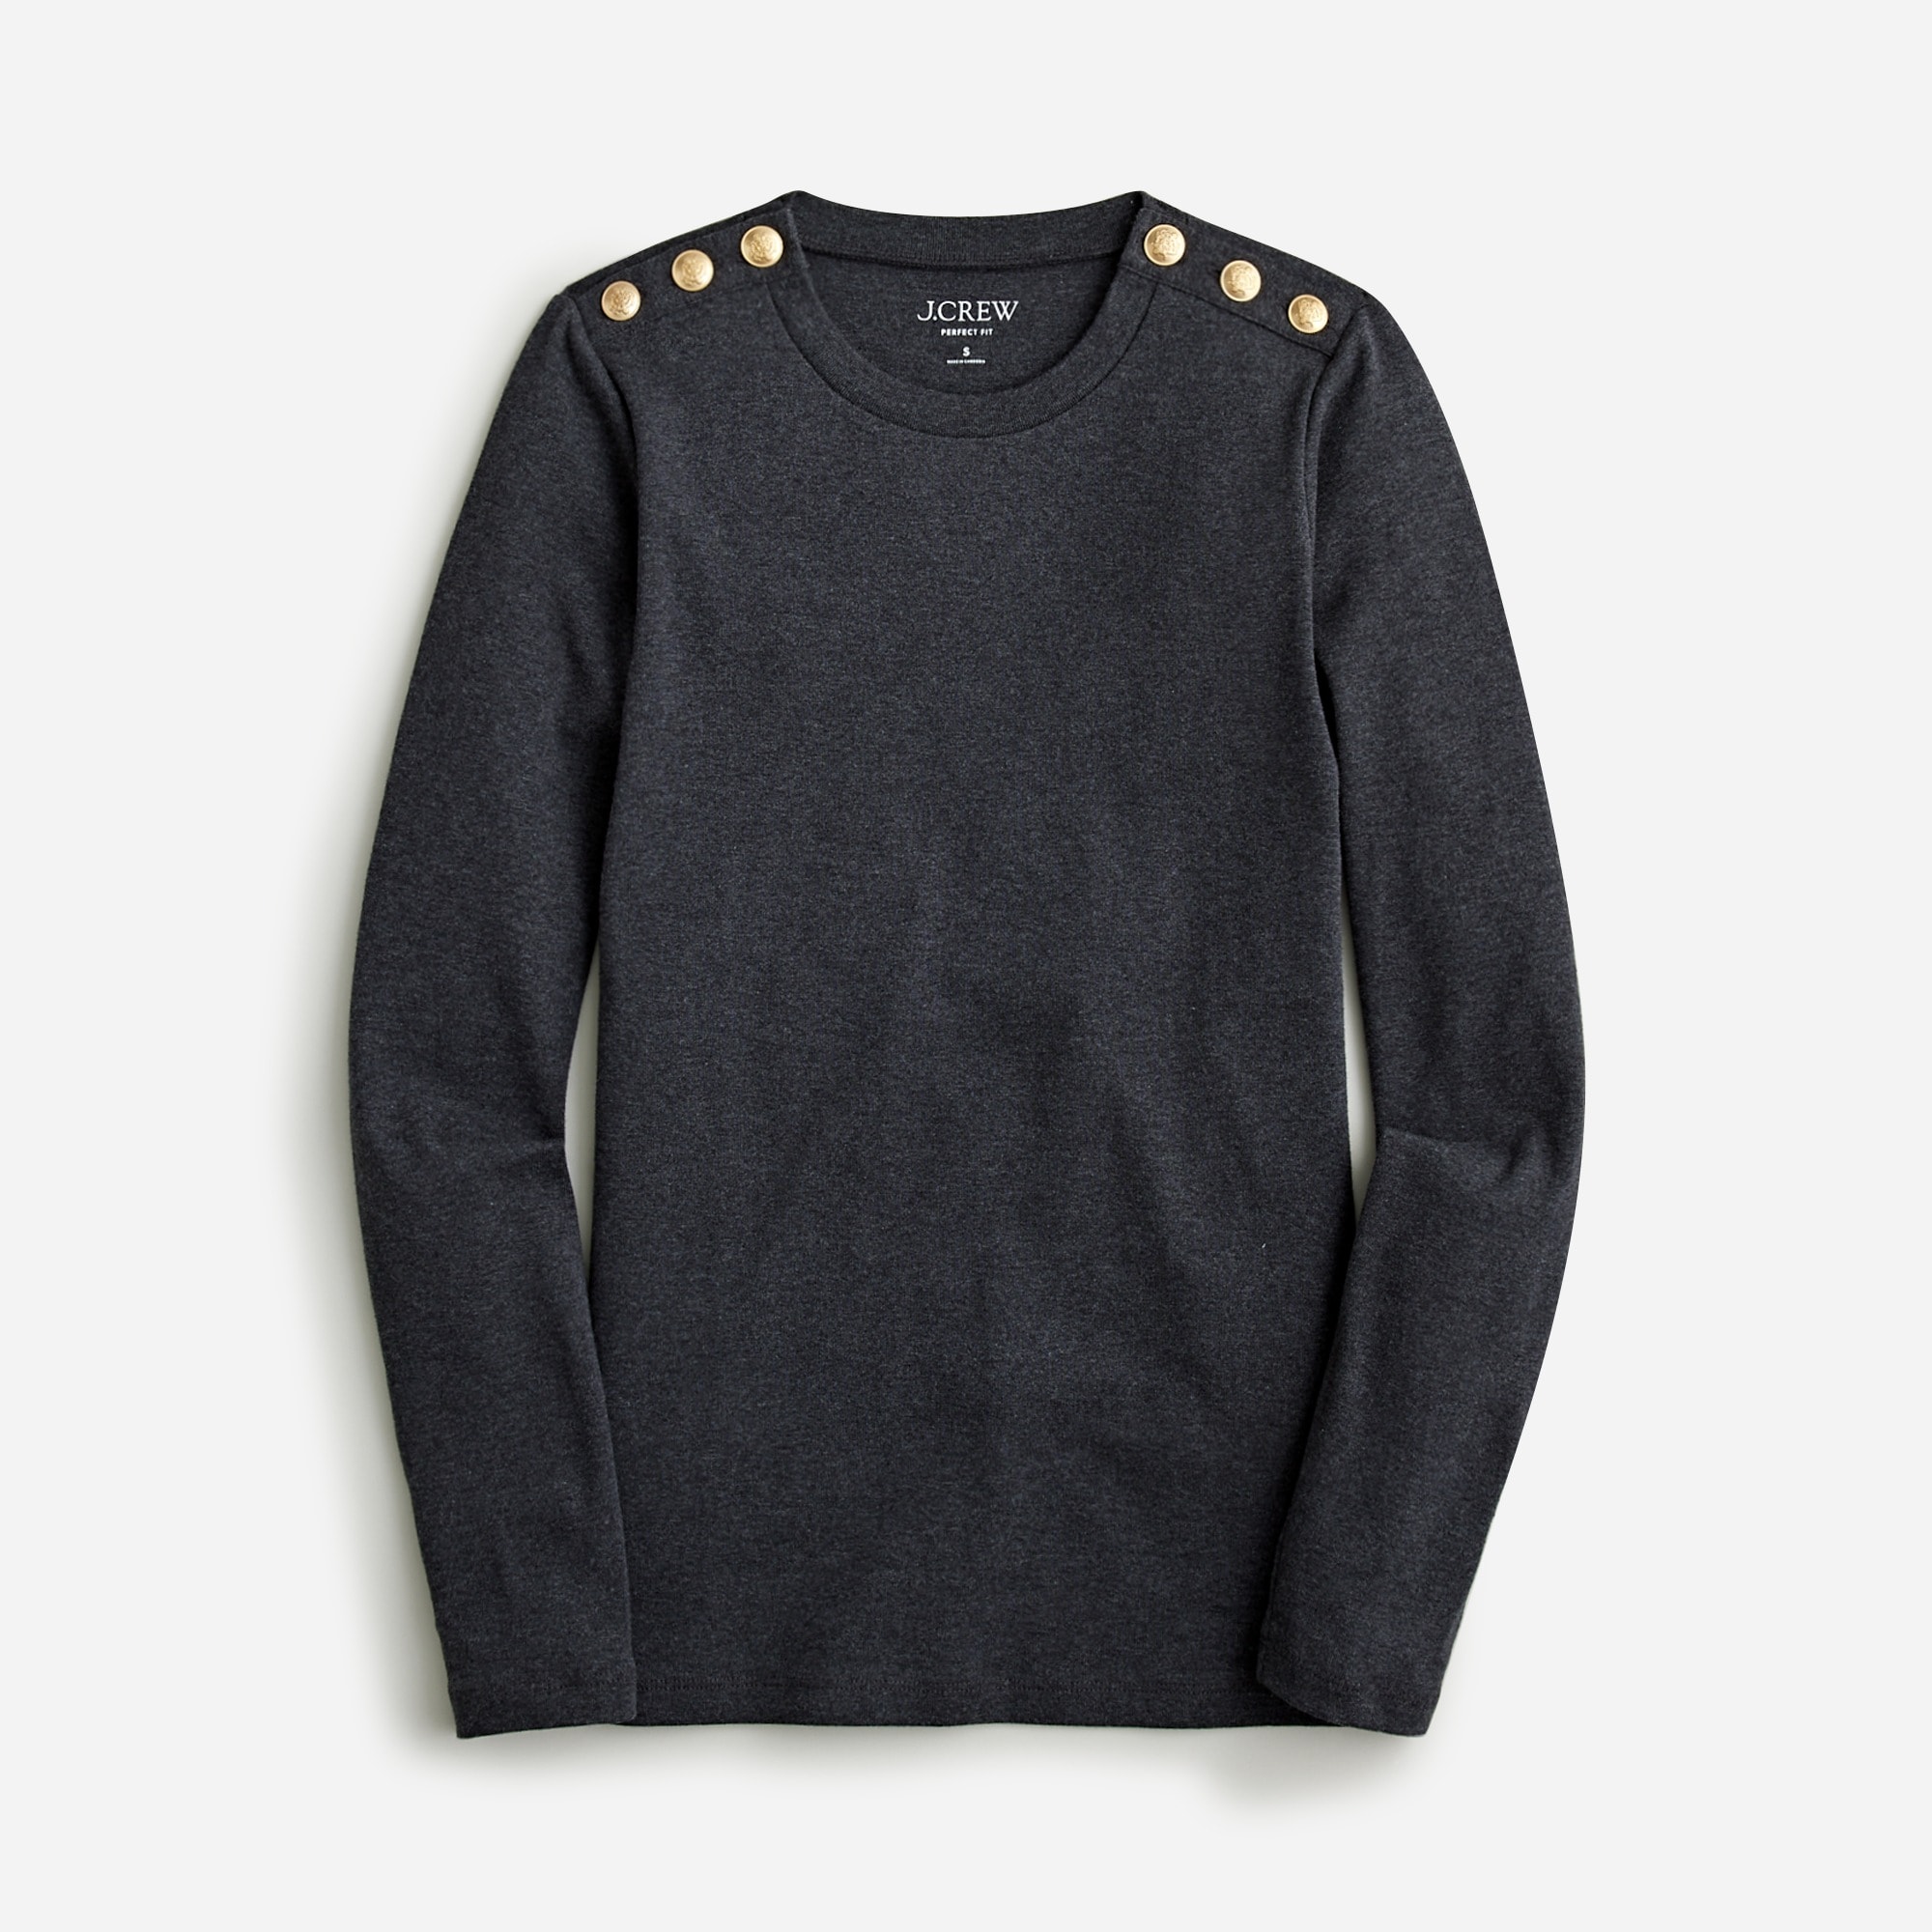  Perfect-fit long-sleeve crewneck T-shirt with buttons